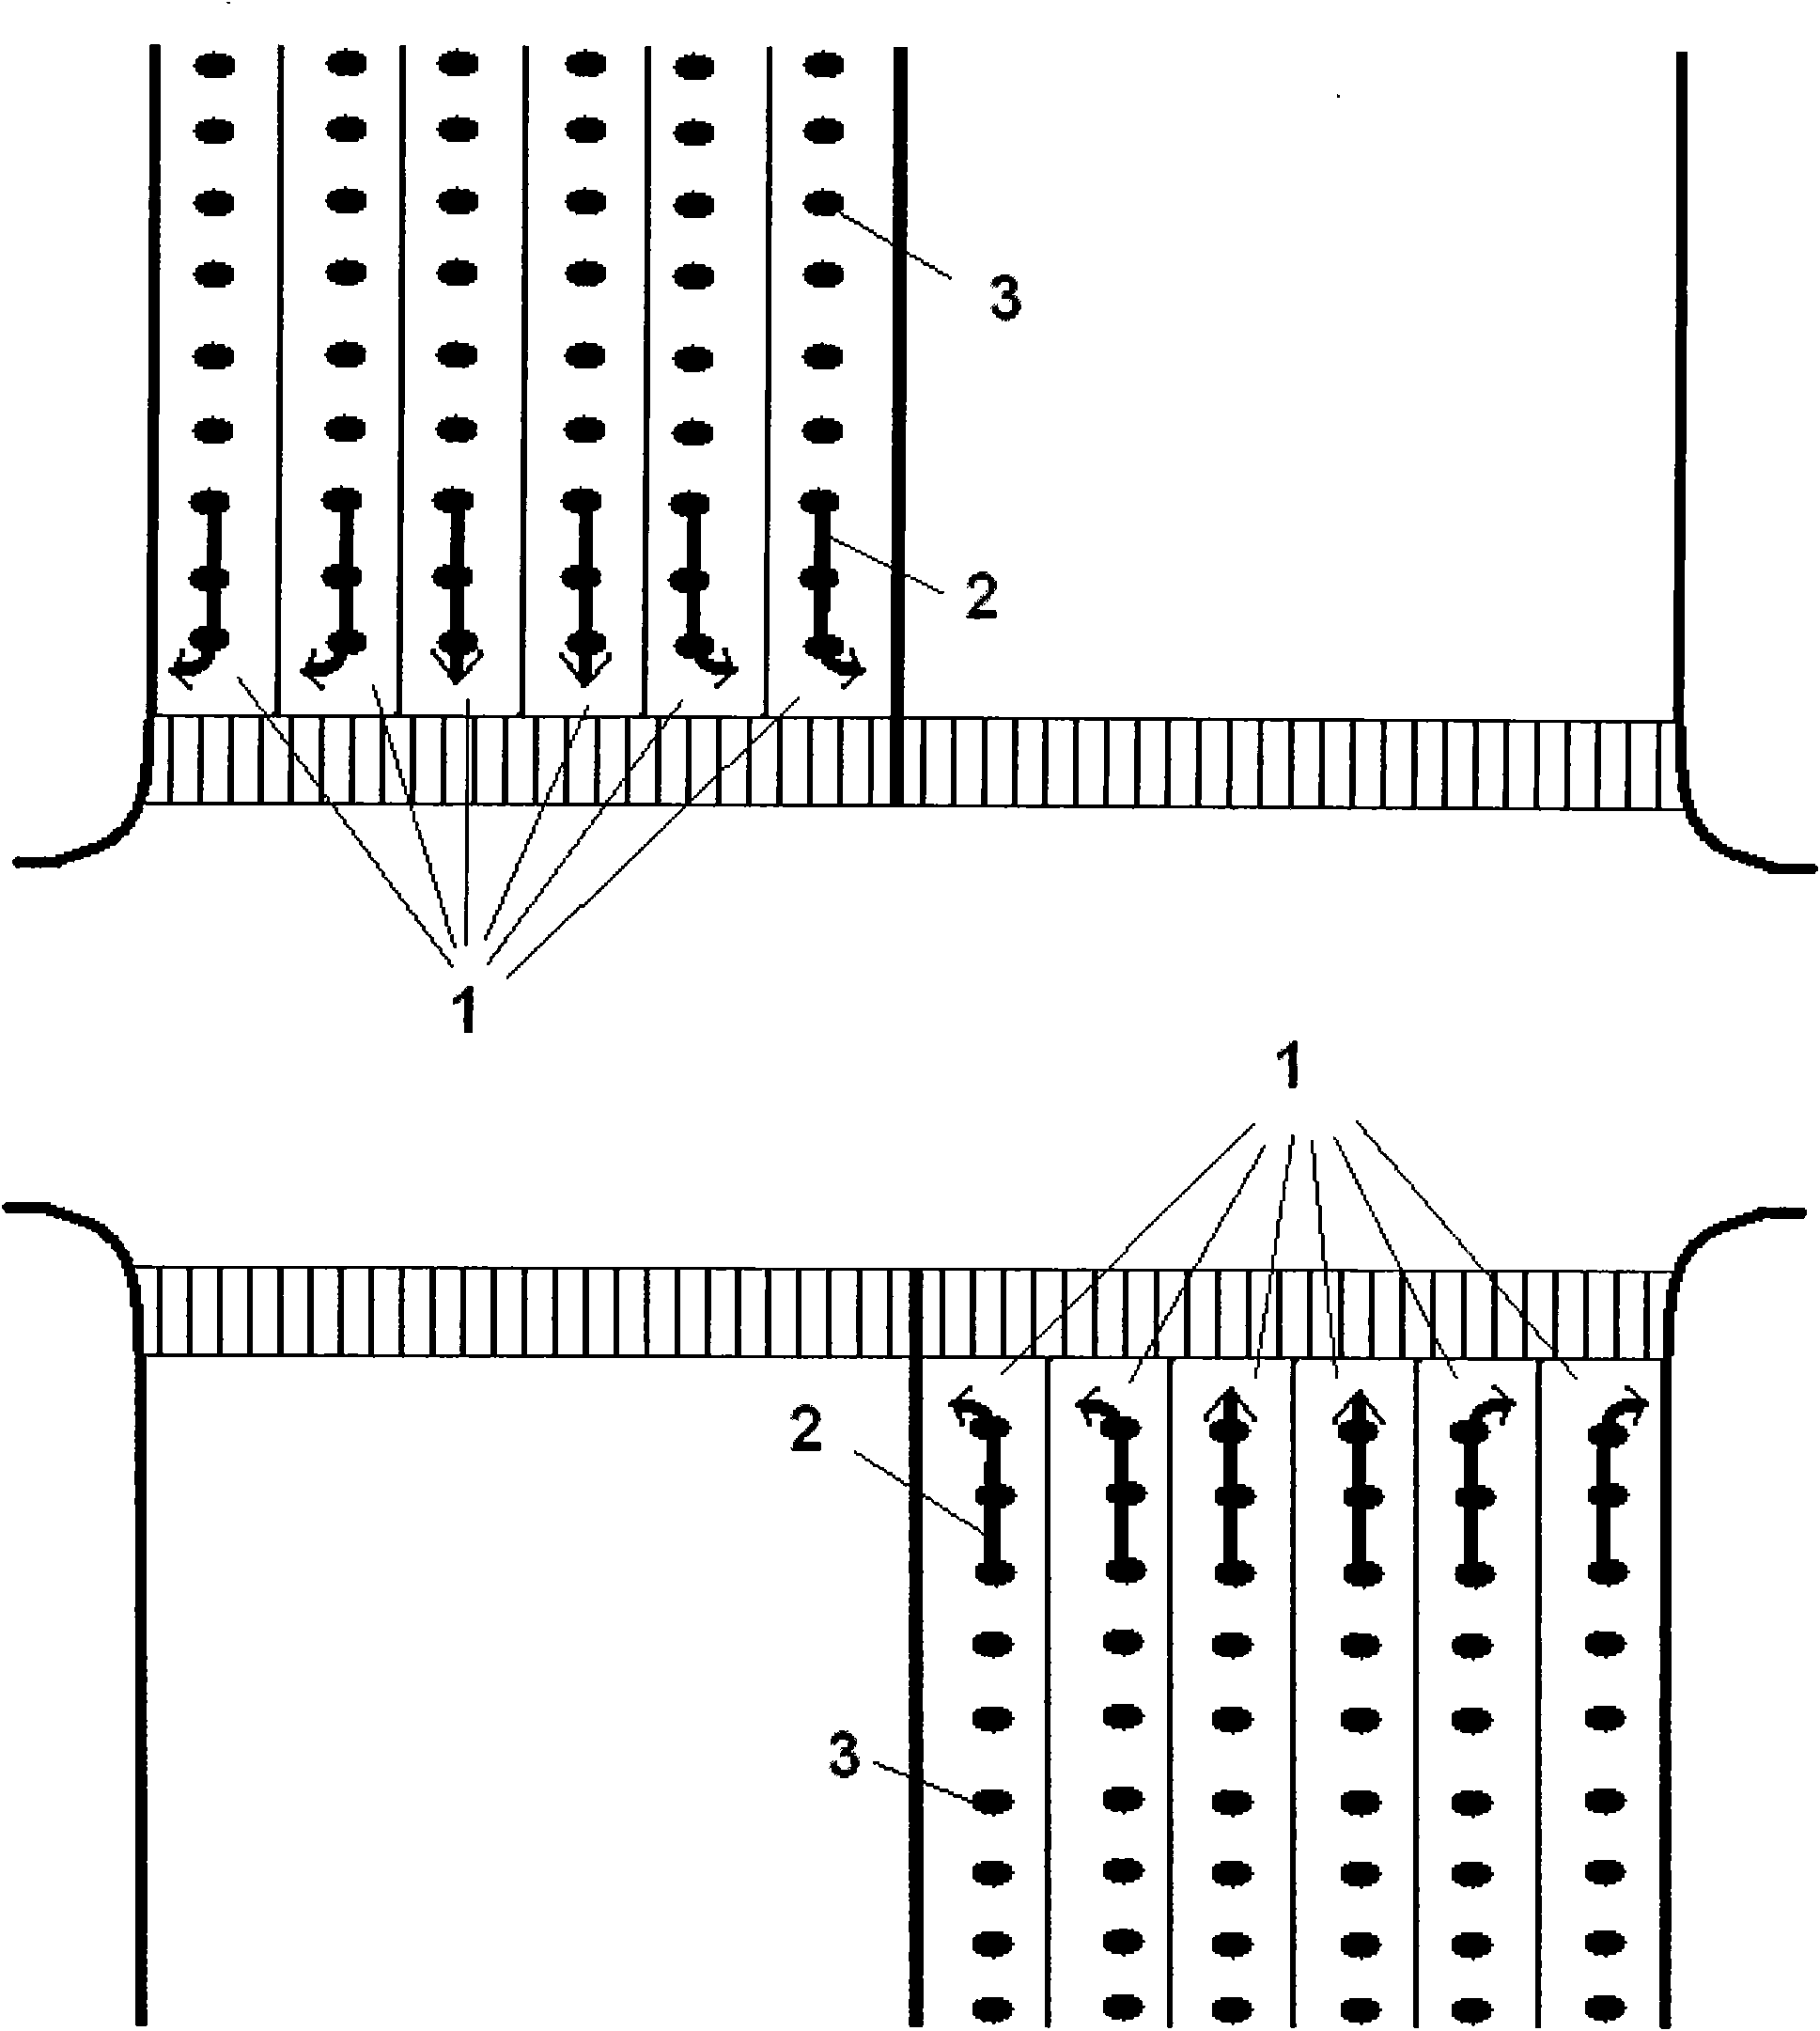 Vehicle road intersection information display system